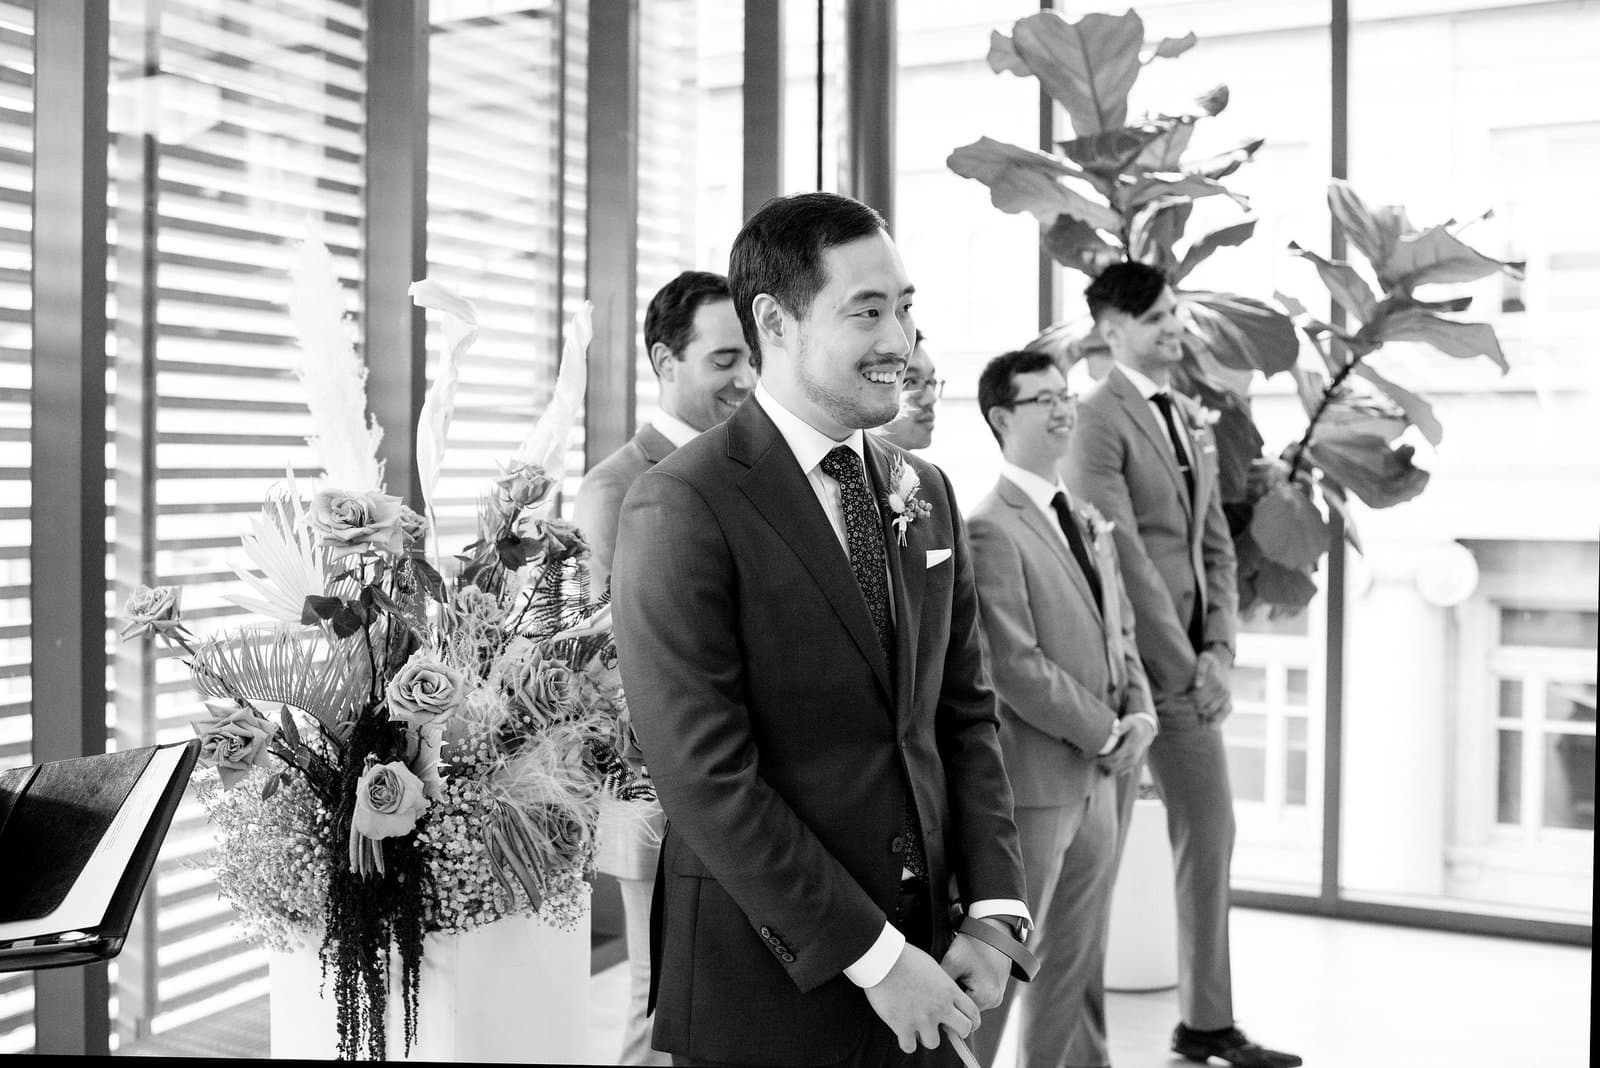 Groom first emotional happy look at Bride walking up the aisle at Ceremony at gardiner museum downtown toronto modern romantic wedding jacqueline james photography